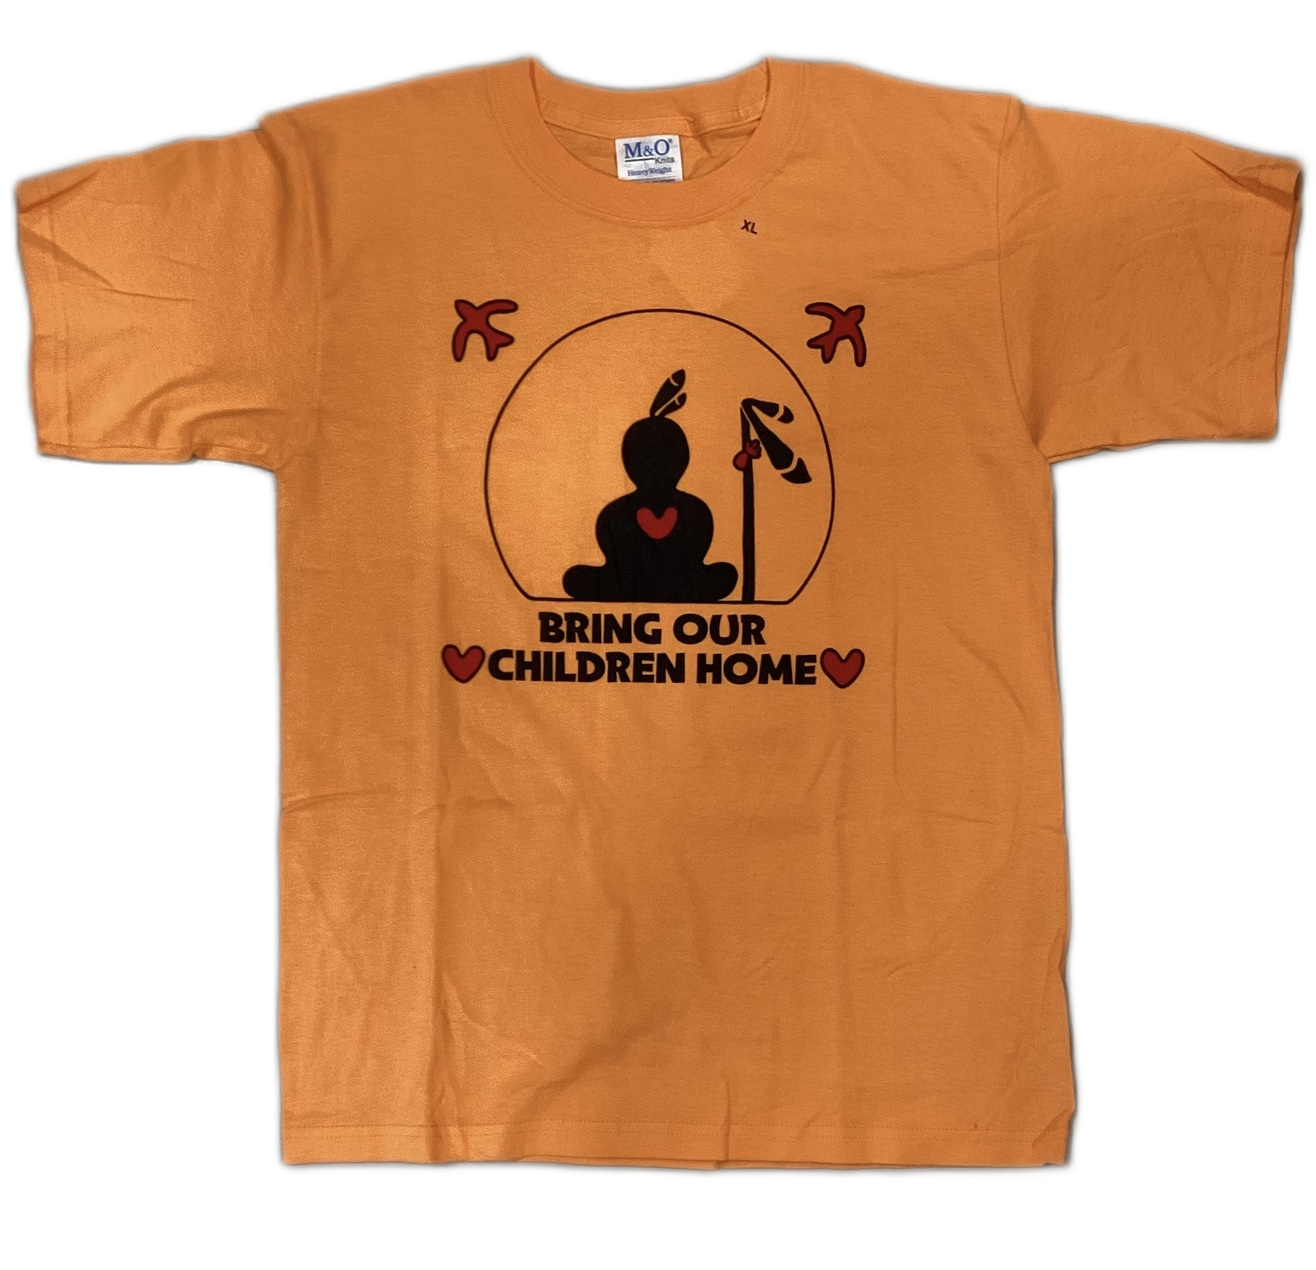 YOUTH - Orange T-Shirt with "Bring Our Children Home" Logo